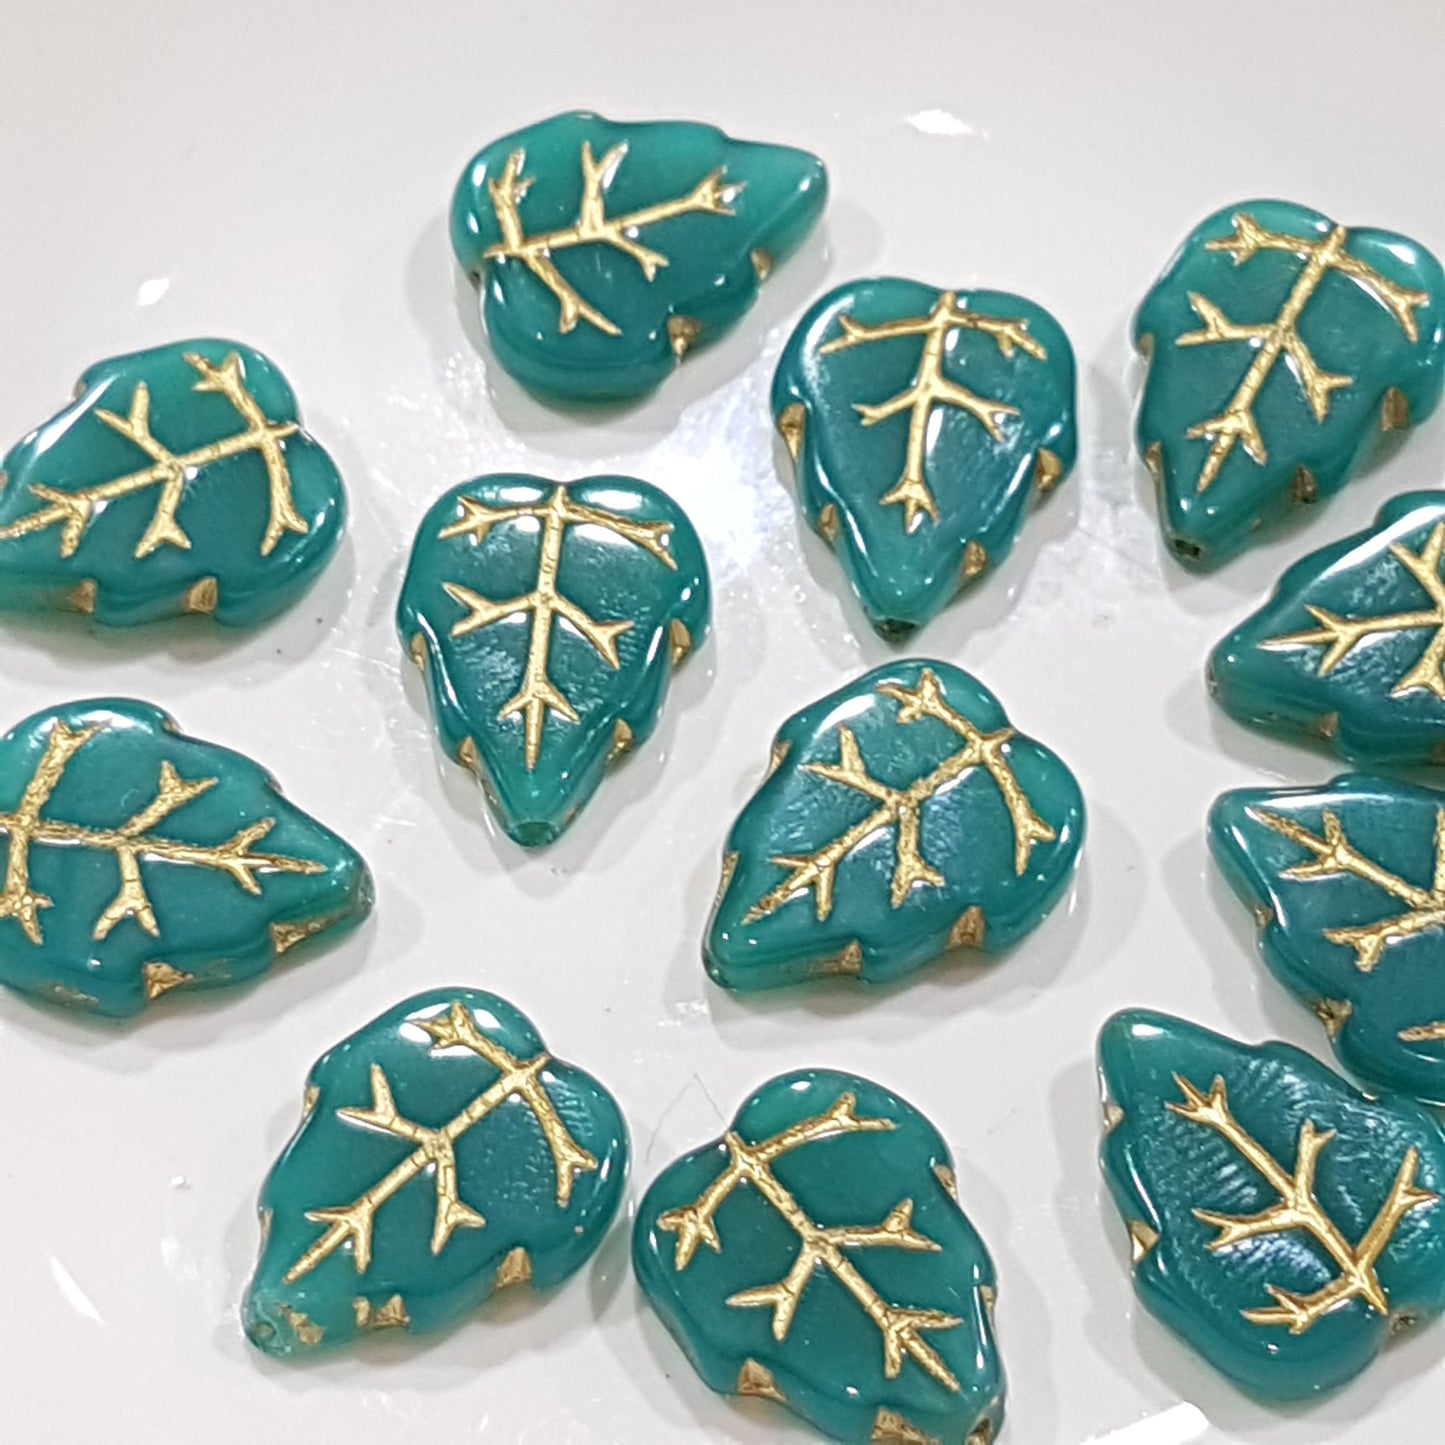 12pc Czech Milky Teal Inlaid Leaves